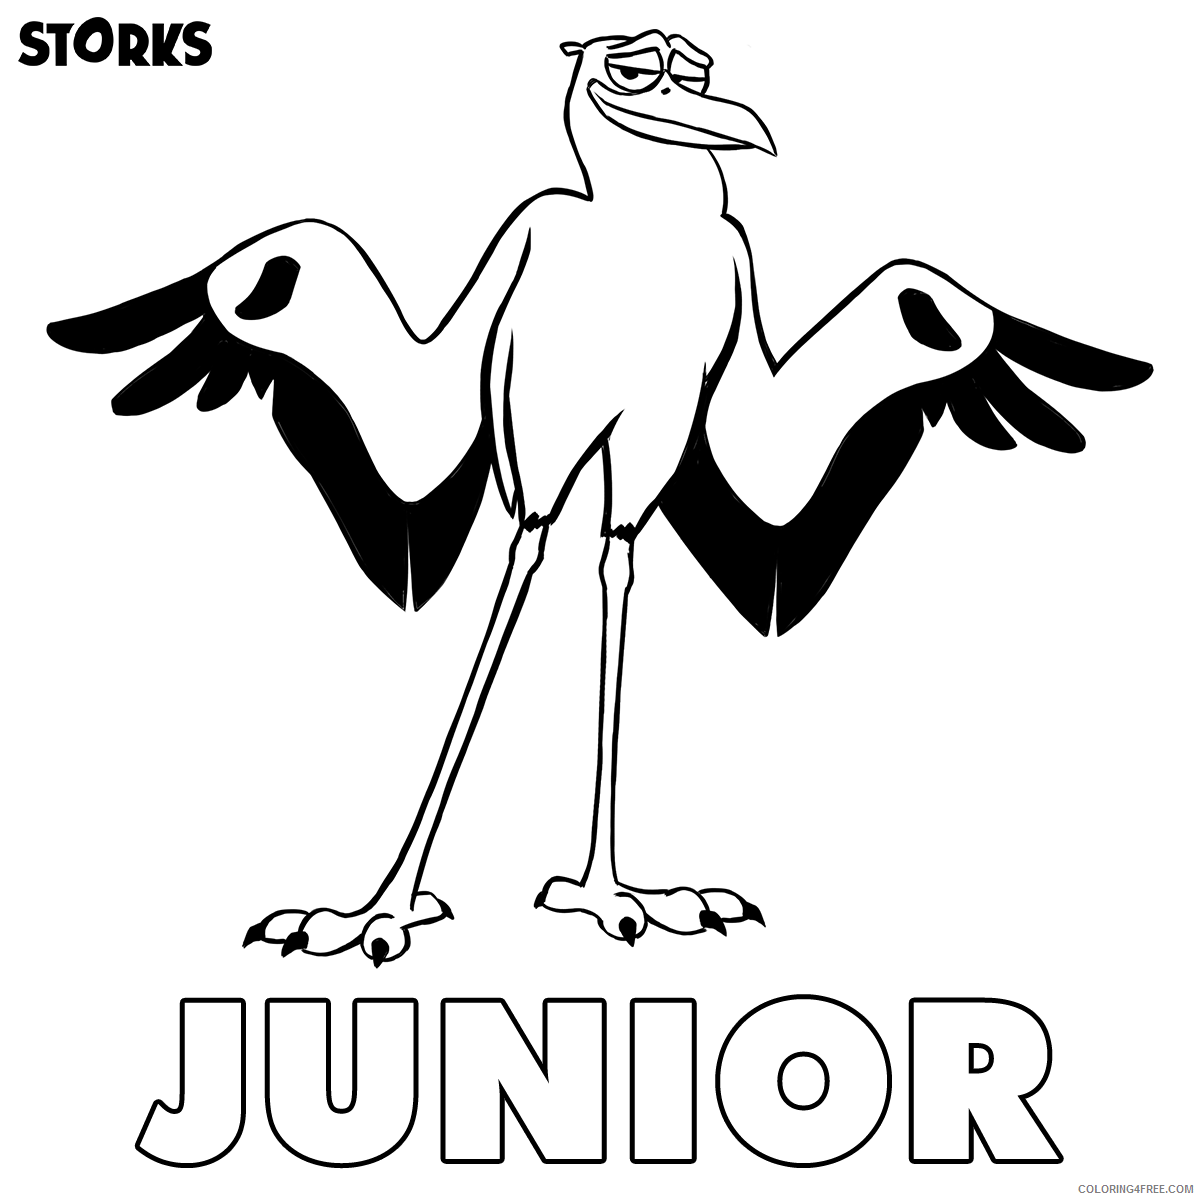 Stork Coloring Pages Animal Printable Sheets storks14 2021 4720 Coloring4free